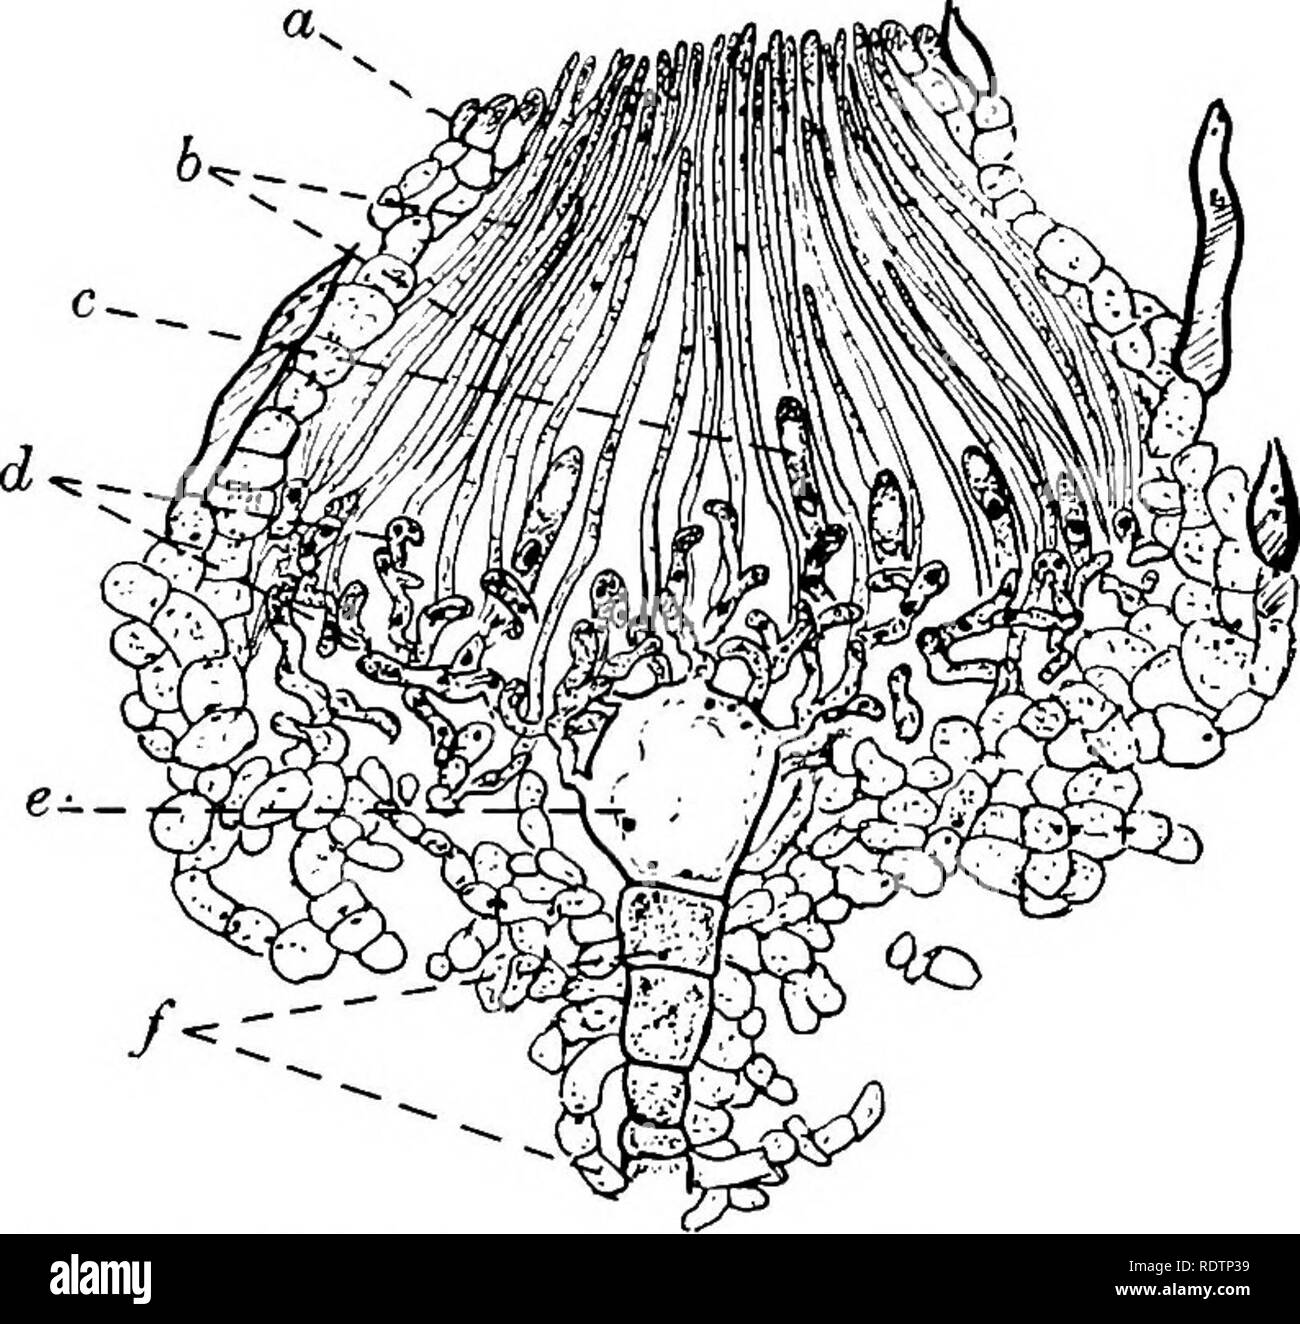 . Fungi, ascomycetes, ustilaginales, uredinales. Fungi. Pig. Otidea aurantia Mass.; apotheci, nat. size. Fig. S'Z. Lachnea stercorea (Pers.) Gill.; ascocarp in longitudinal section showing young asci and para- physes, x 160. a. sheath; b. paraphyses; c. ascus; &lt;a. ascogenous hyphae; e. oogonium ;f. stalk of archicarp. wall of the cup (fig. 52). The lower part of the cup is filled by the hypo- thecium, a tangle of hyphae, some vegetative, some ascogenous. These give rise to the sub-hymenial layer where the paraphyses have their origin and where the young asci are developed. The asci and para Stock Photo